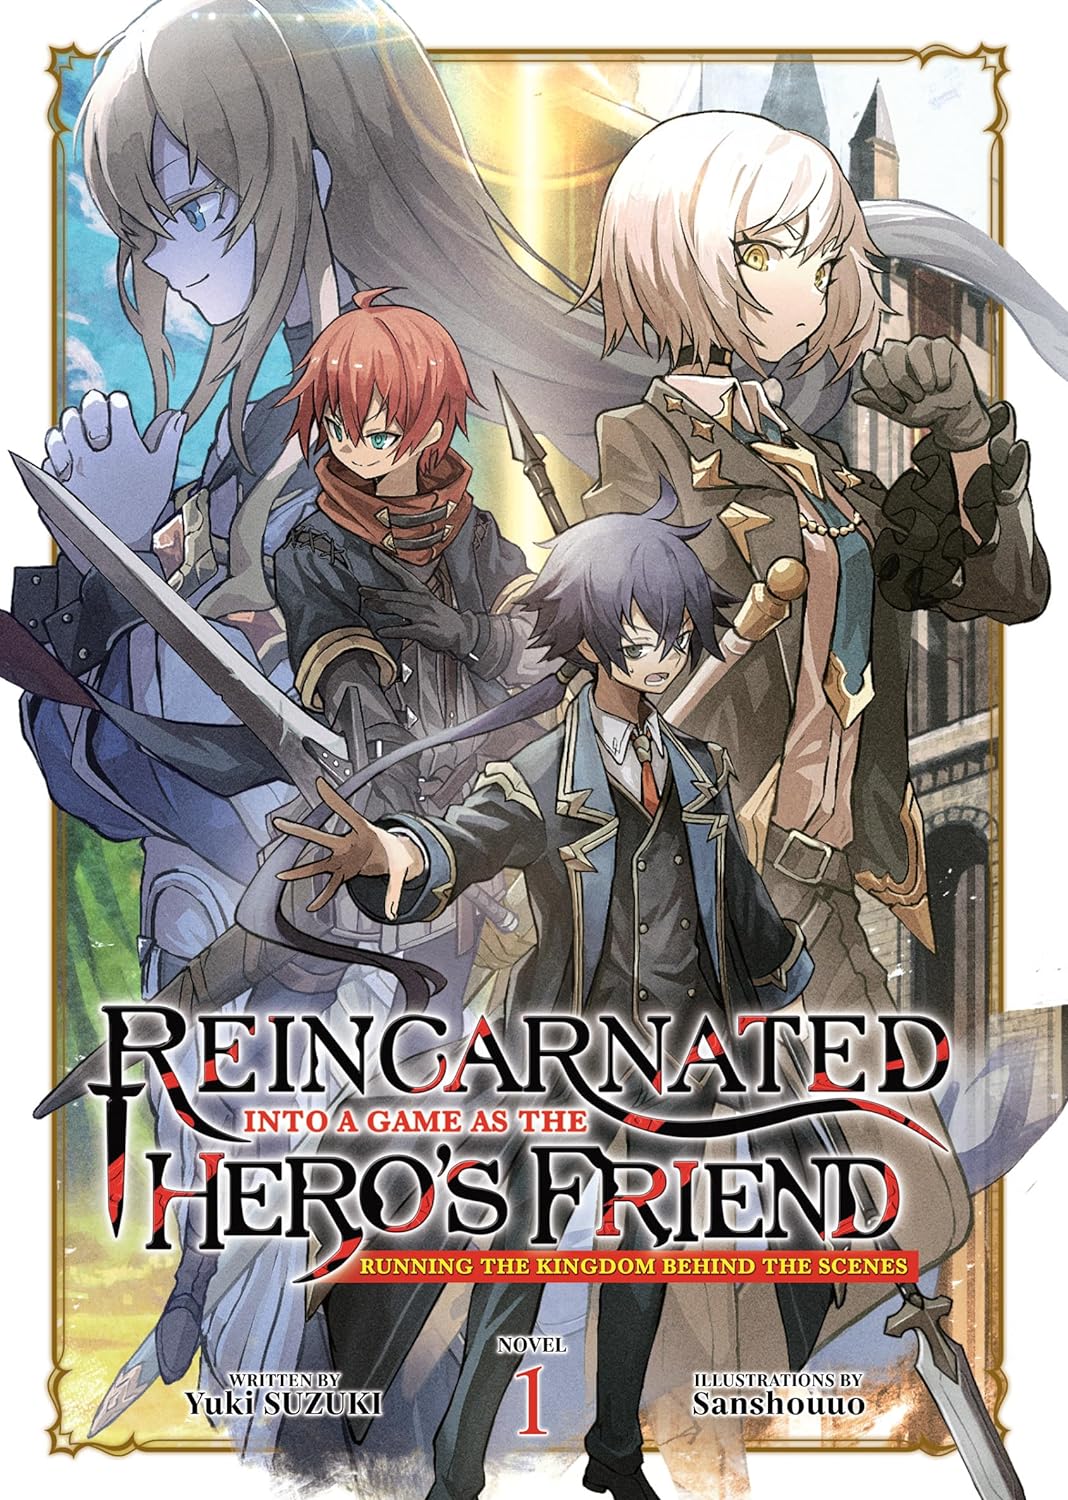 Reincarnated Into a Game as the Hero's Friend: Running the Kingdom Behind the Scenes (Light Novel) Vol. 01